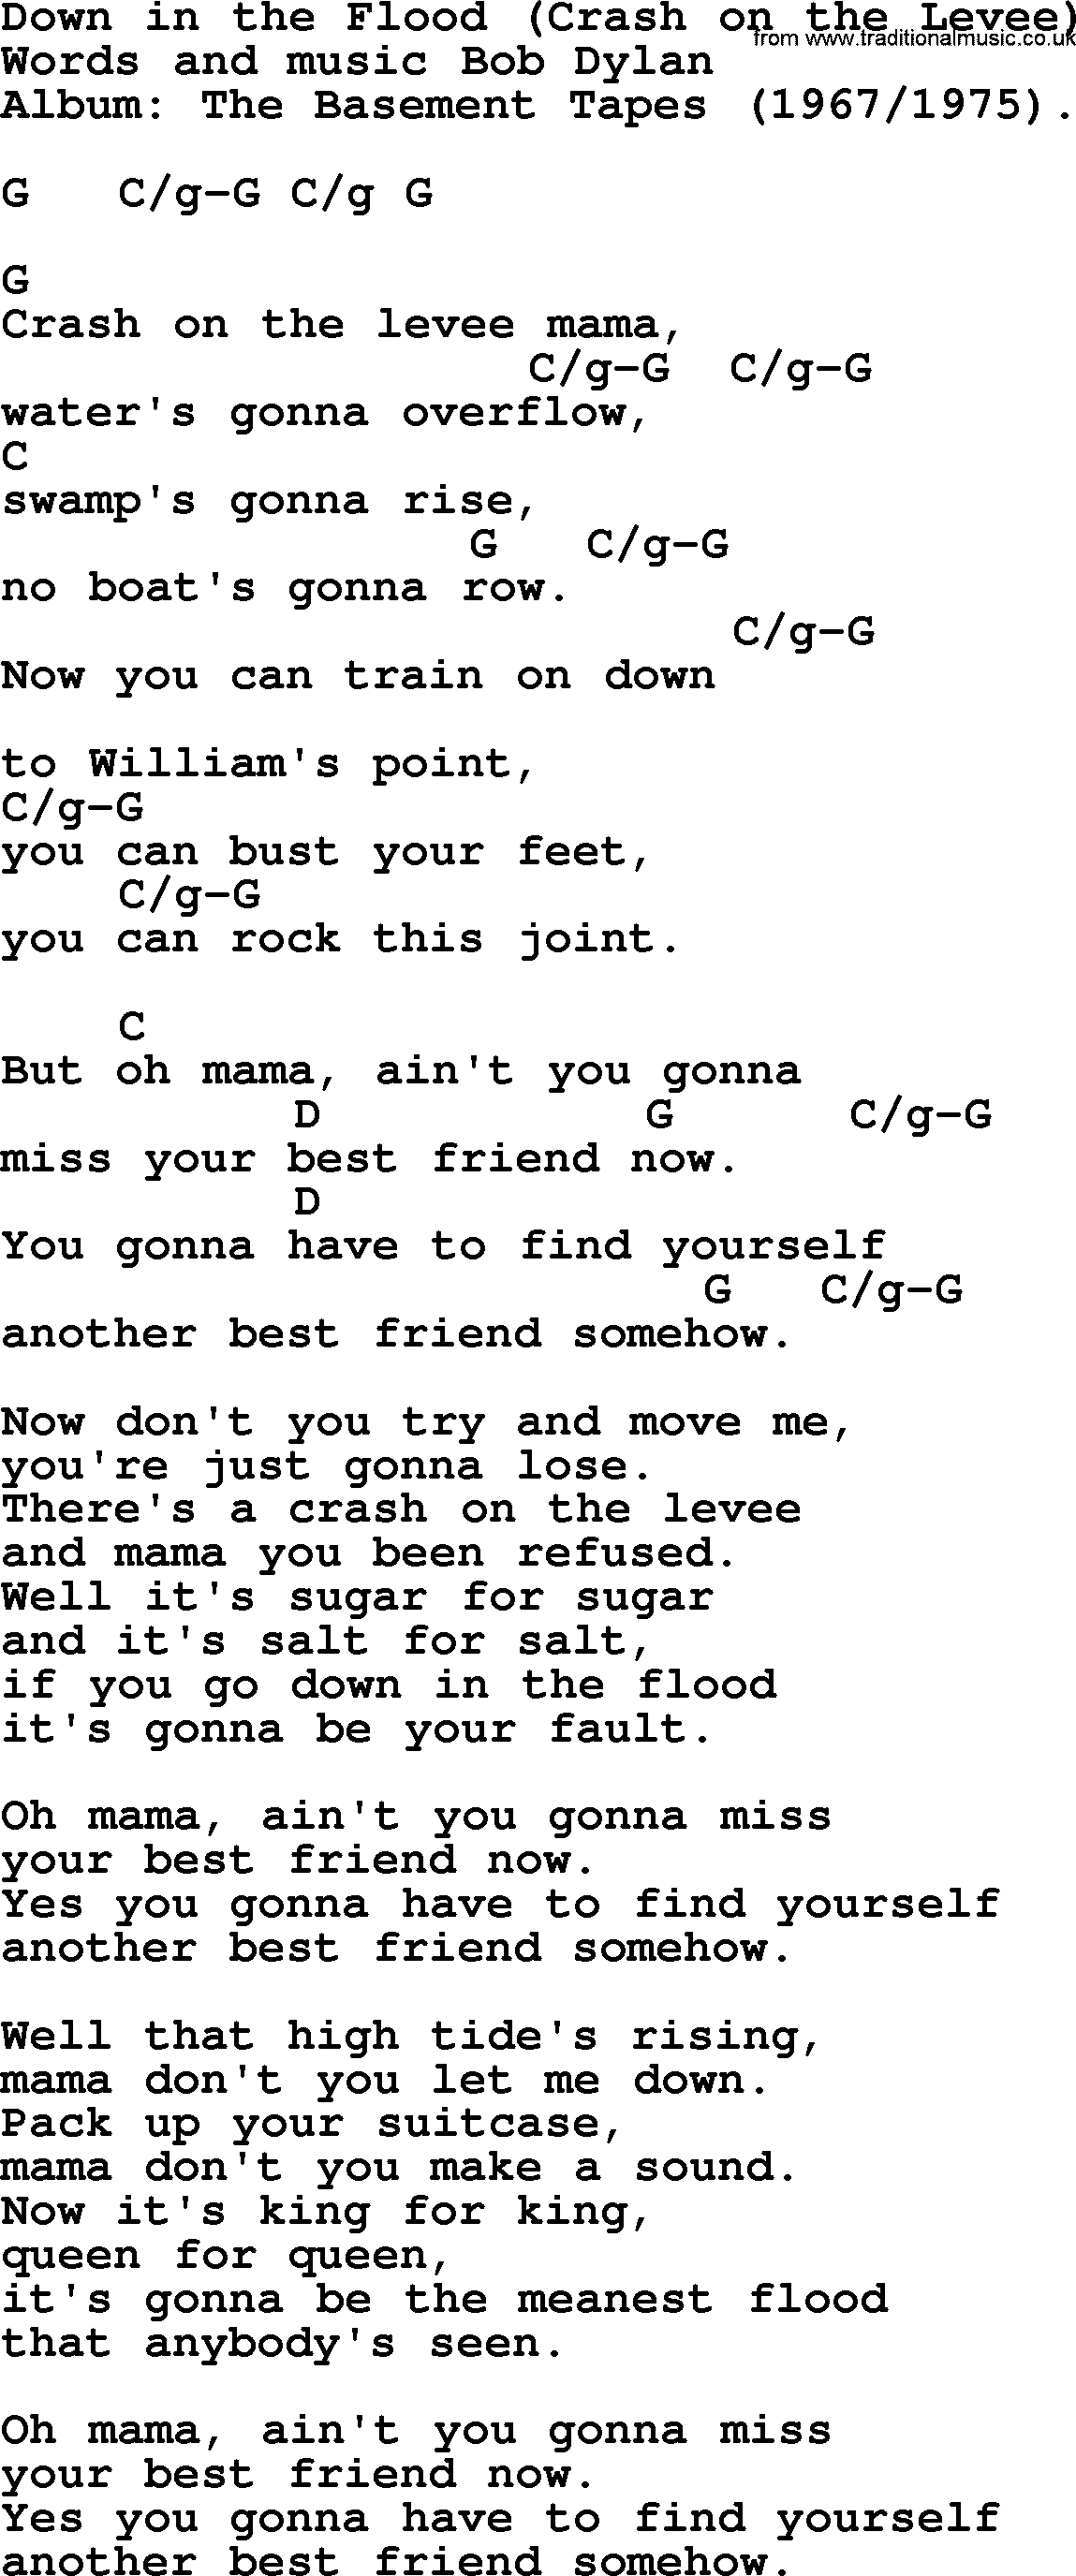 Bob Dylan song, lyrics with chords - Down in the Flood (Crash on the Levee)